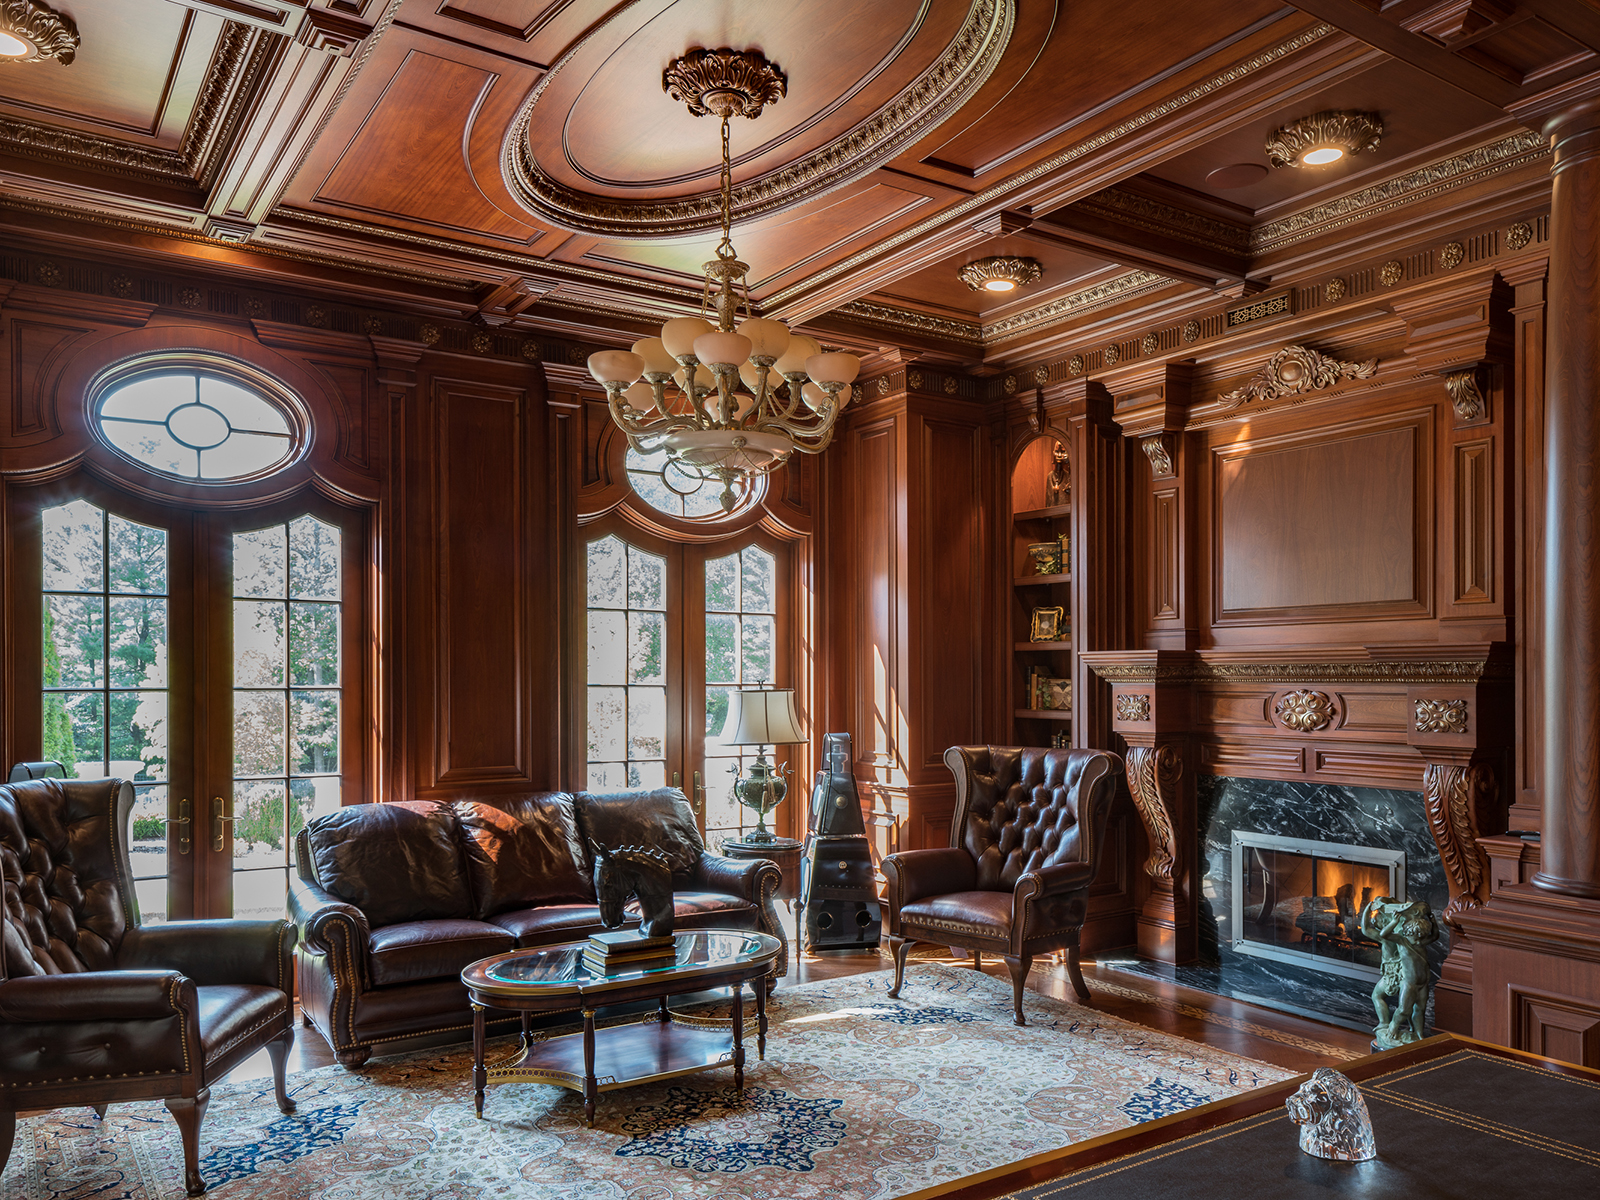 A private sitting room within the estate's mahogany-clad library